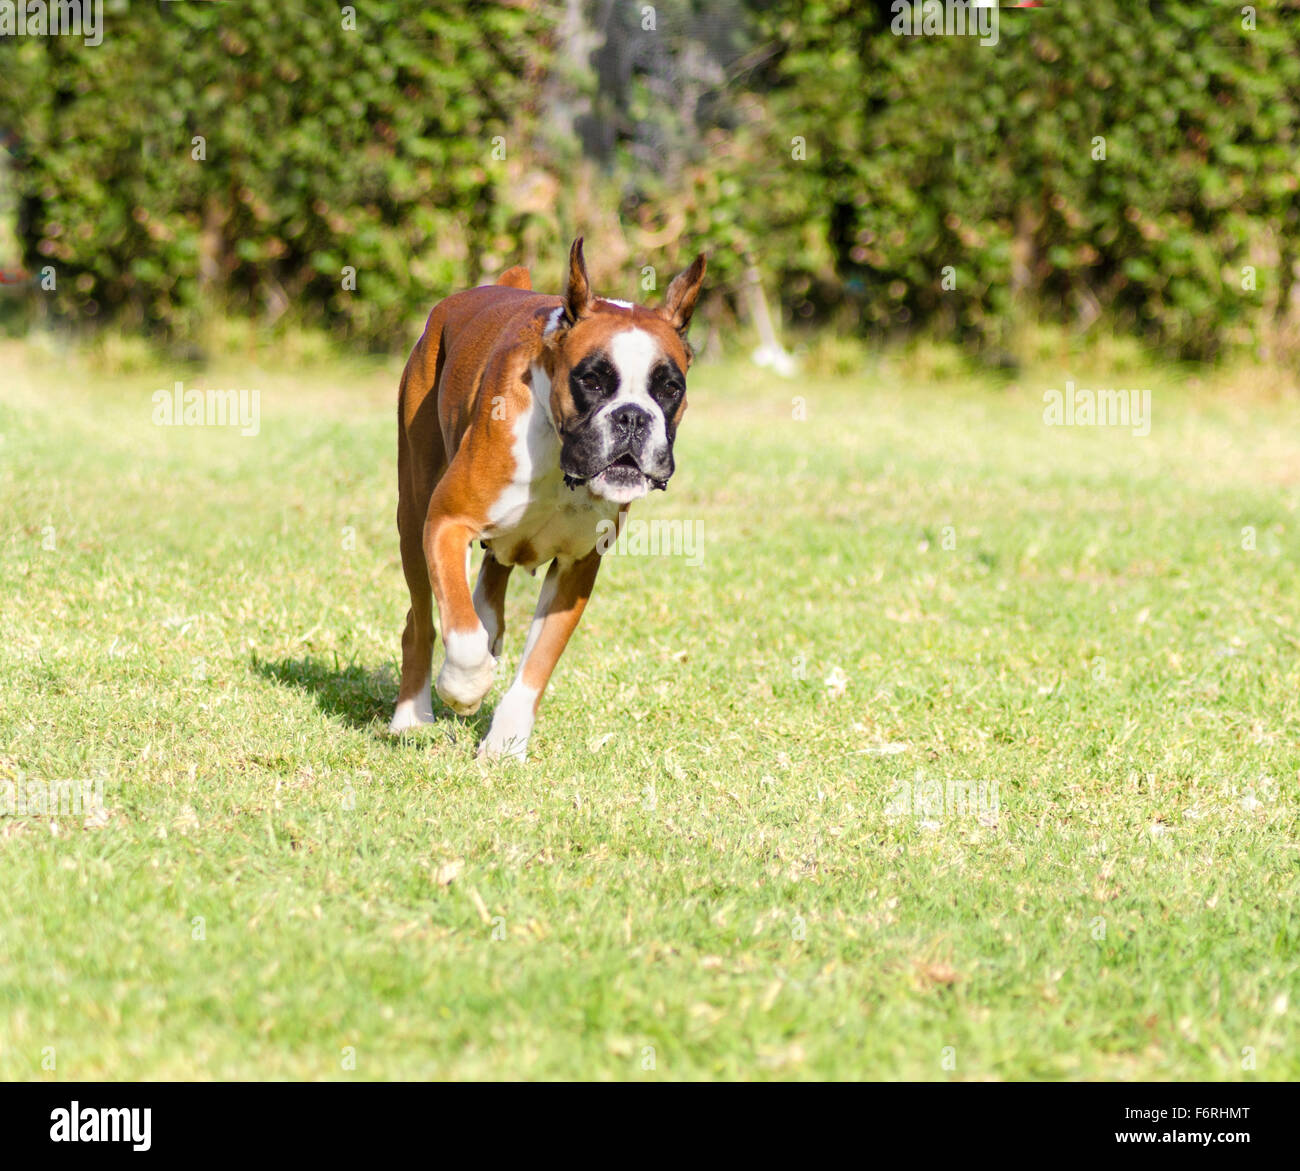 A young, beautiful, fawn red mahogany and white, medium sized Boxer dog with cropped ears running on the grass. Boxers have a sh Stock Photo